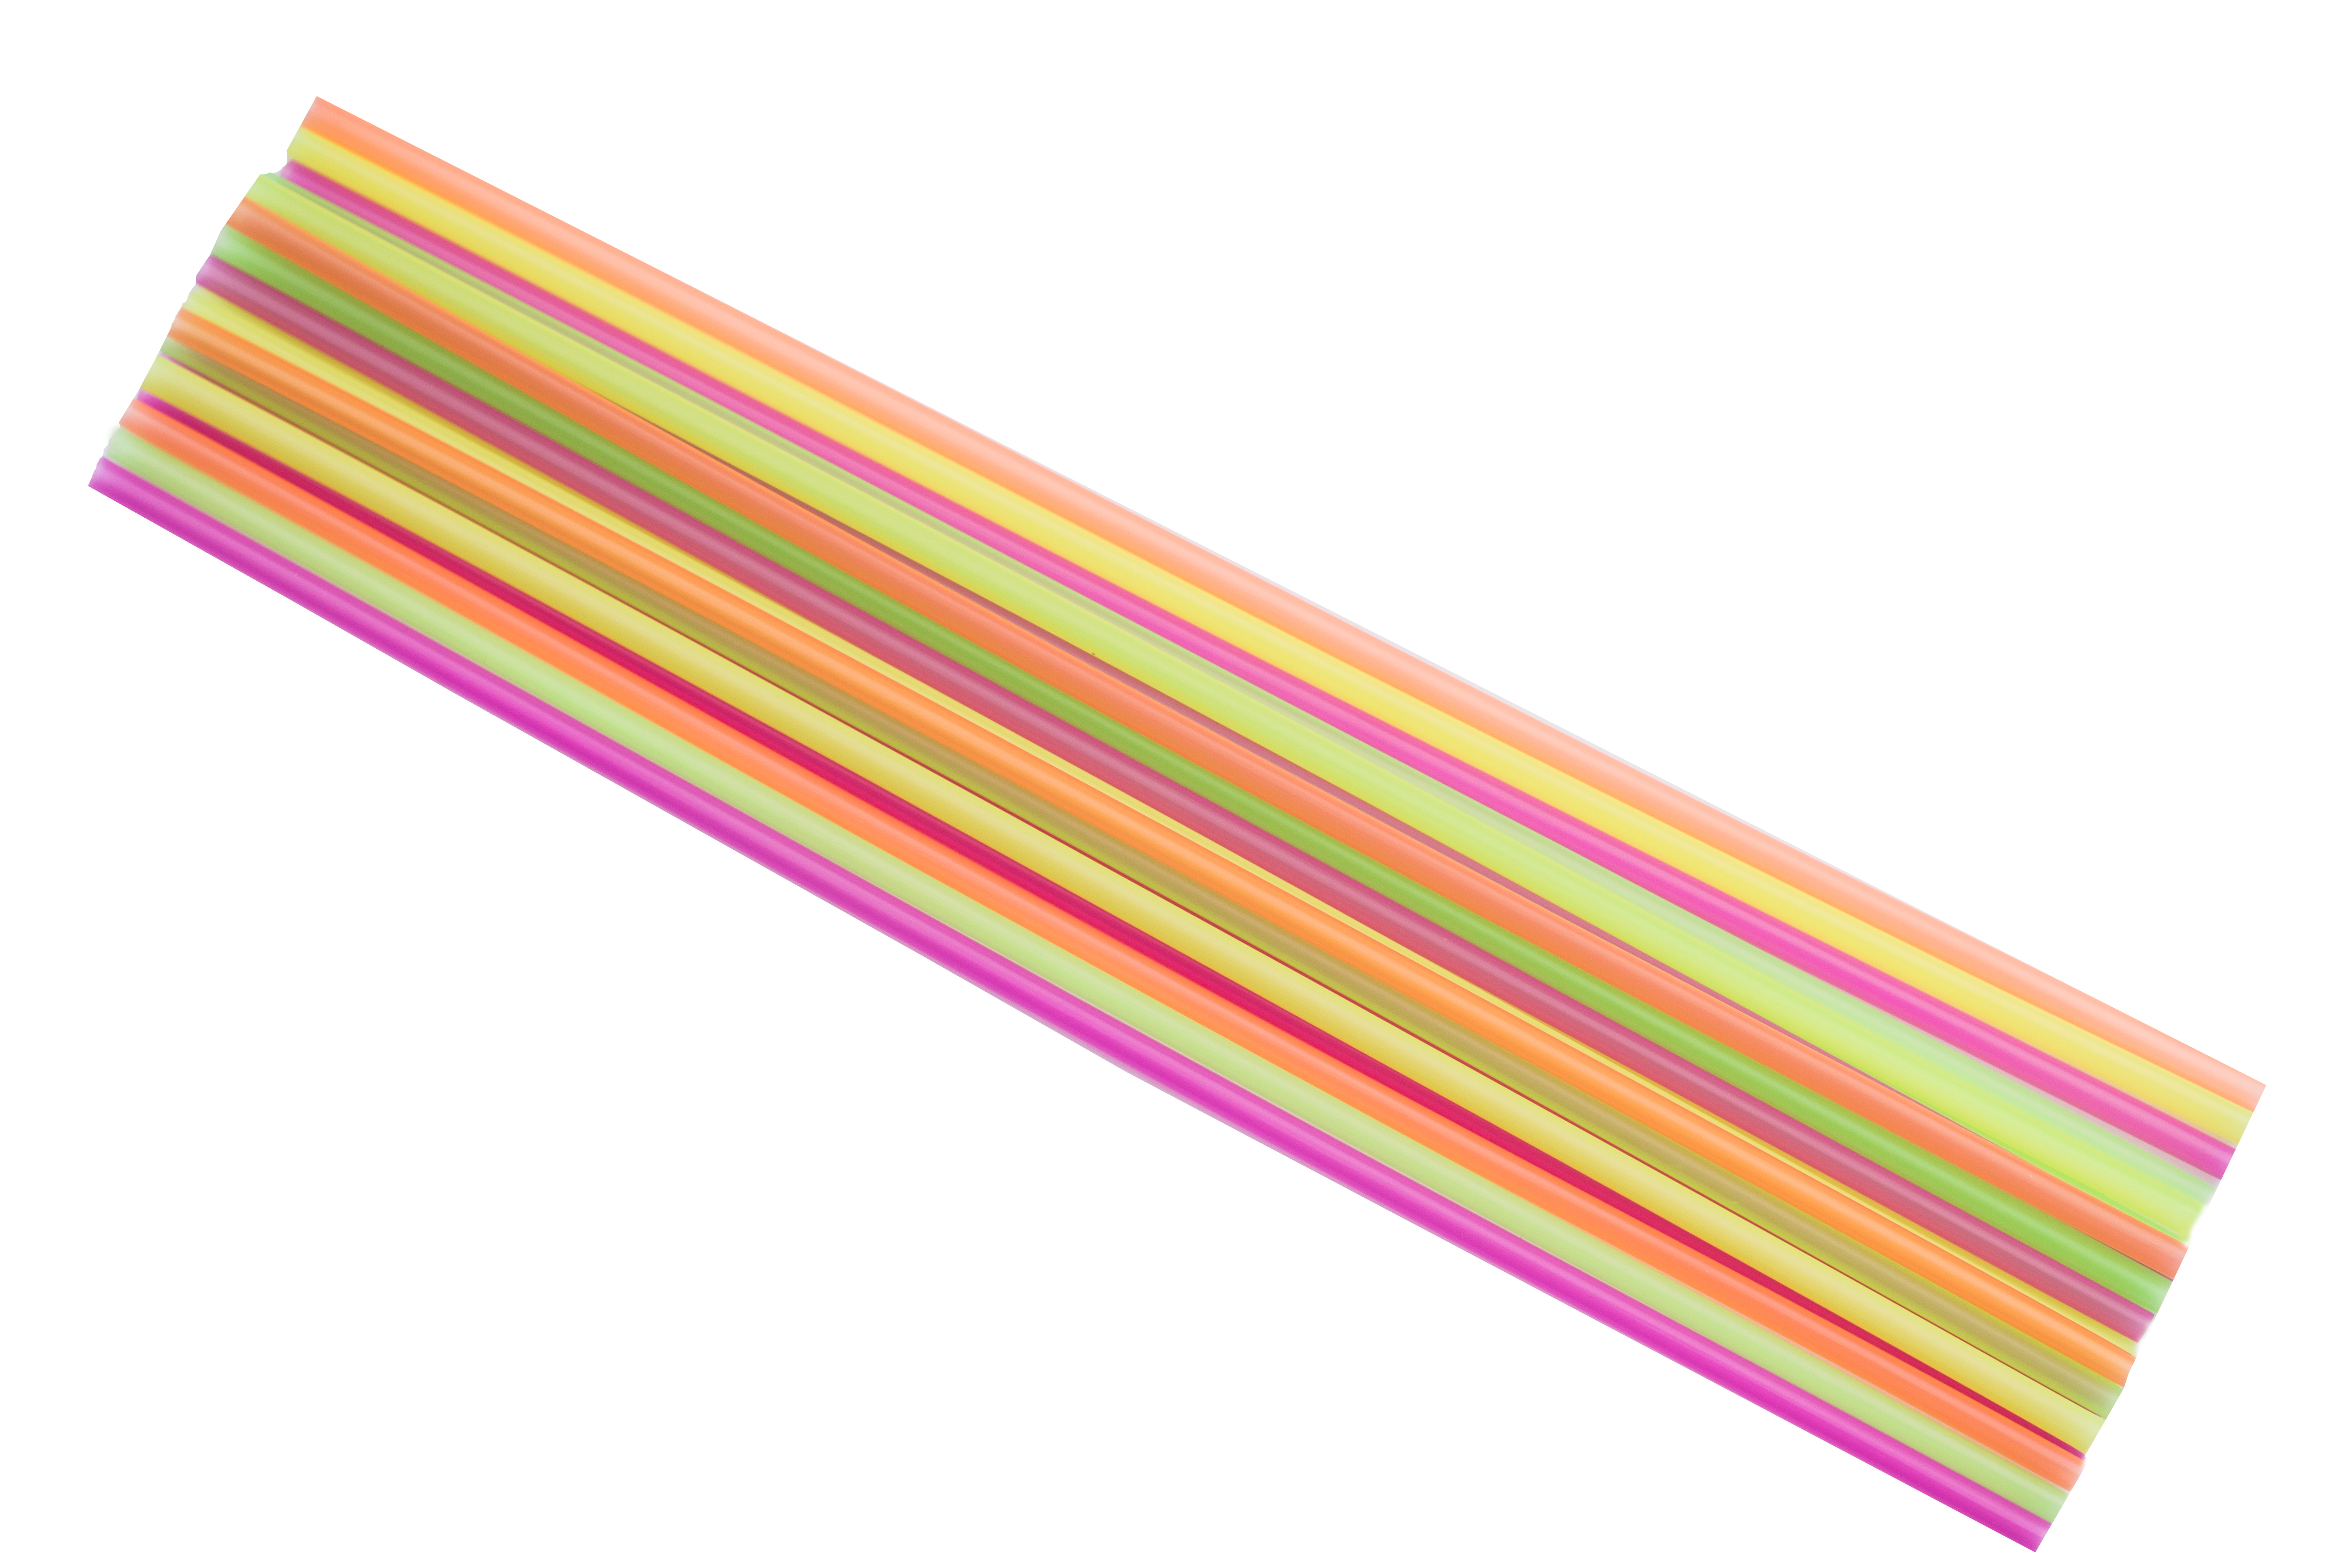 20" Neon Assorted Colors Straight Cut Plastic Straws Box of 500ct